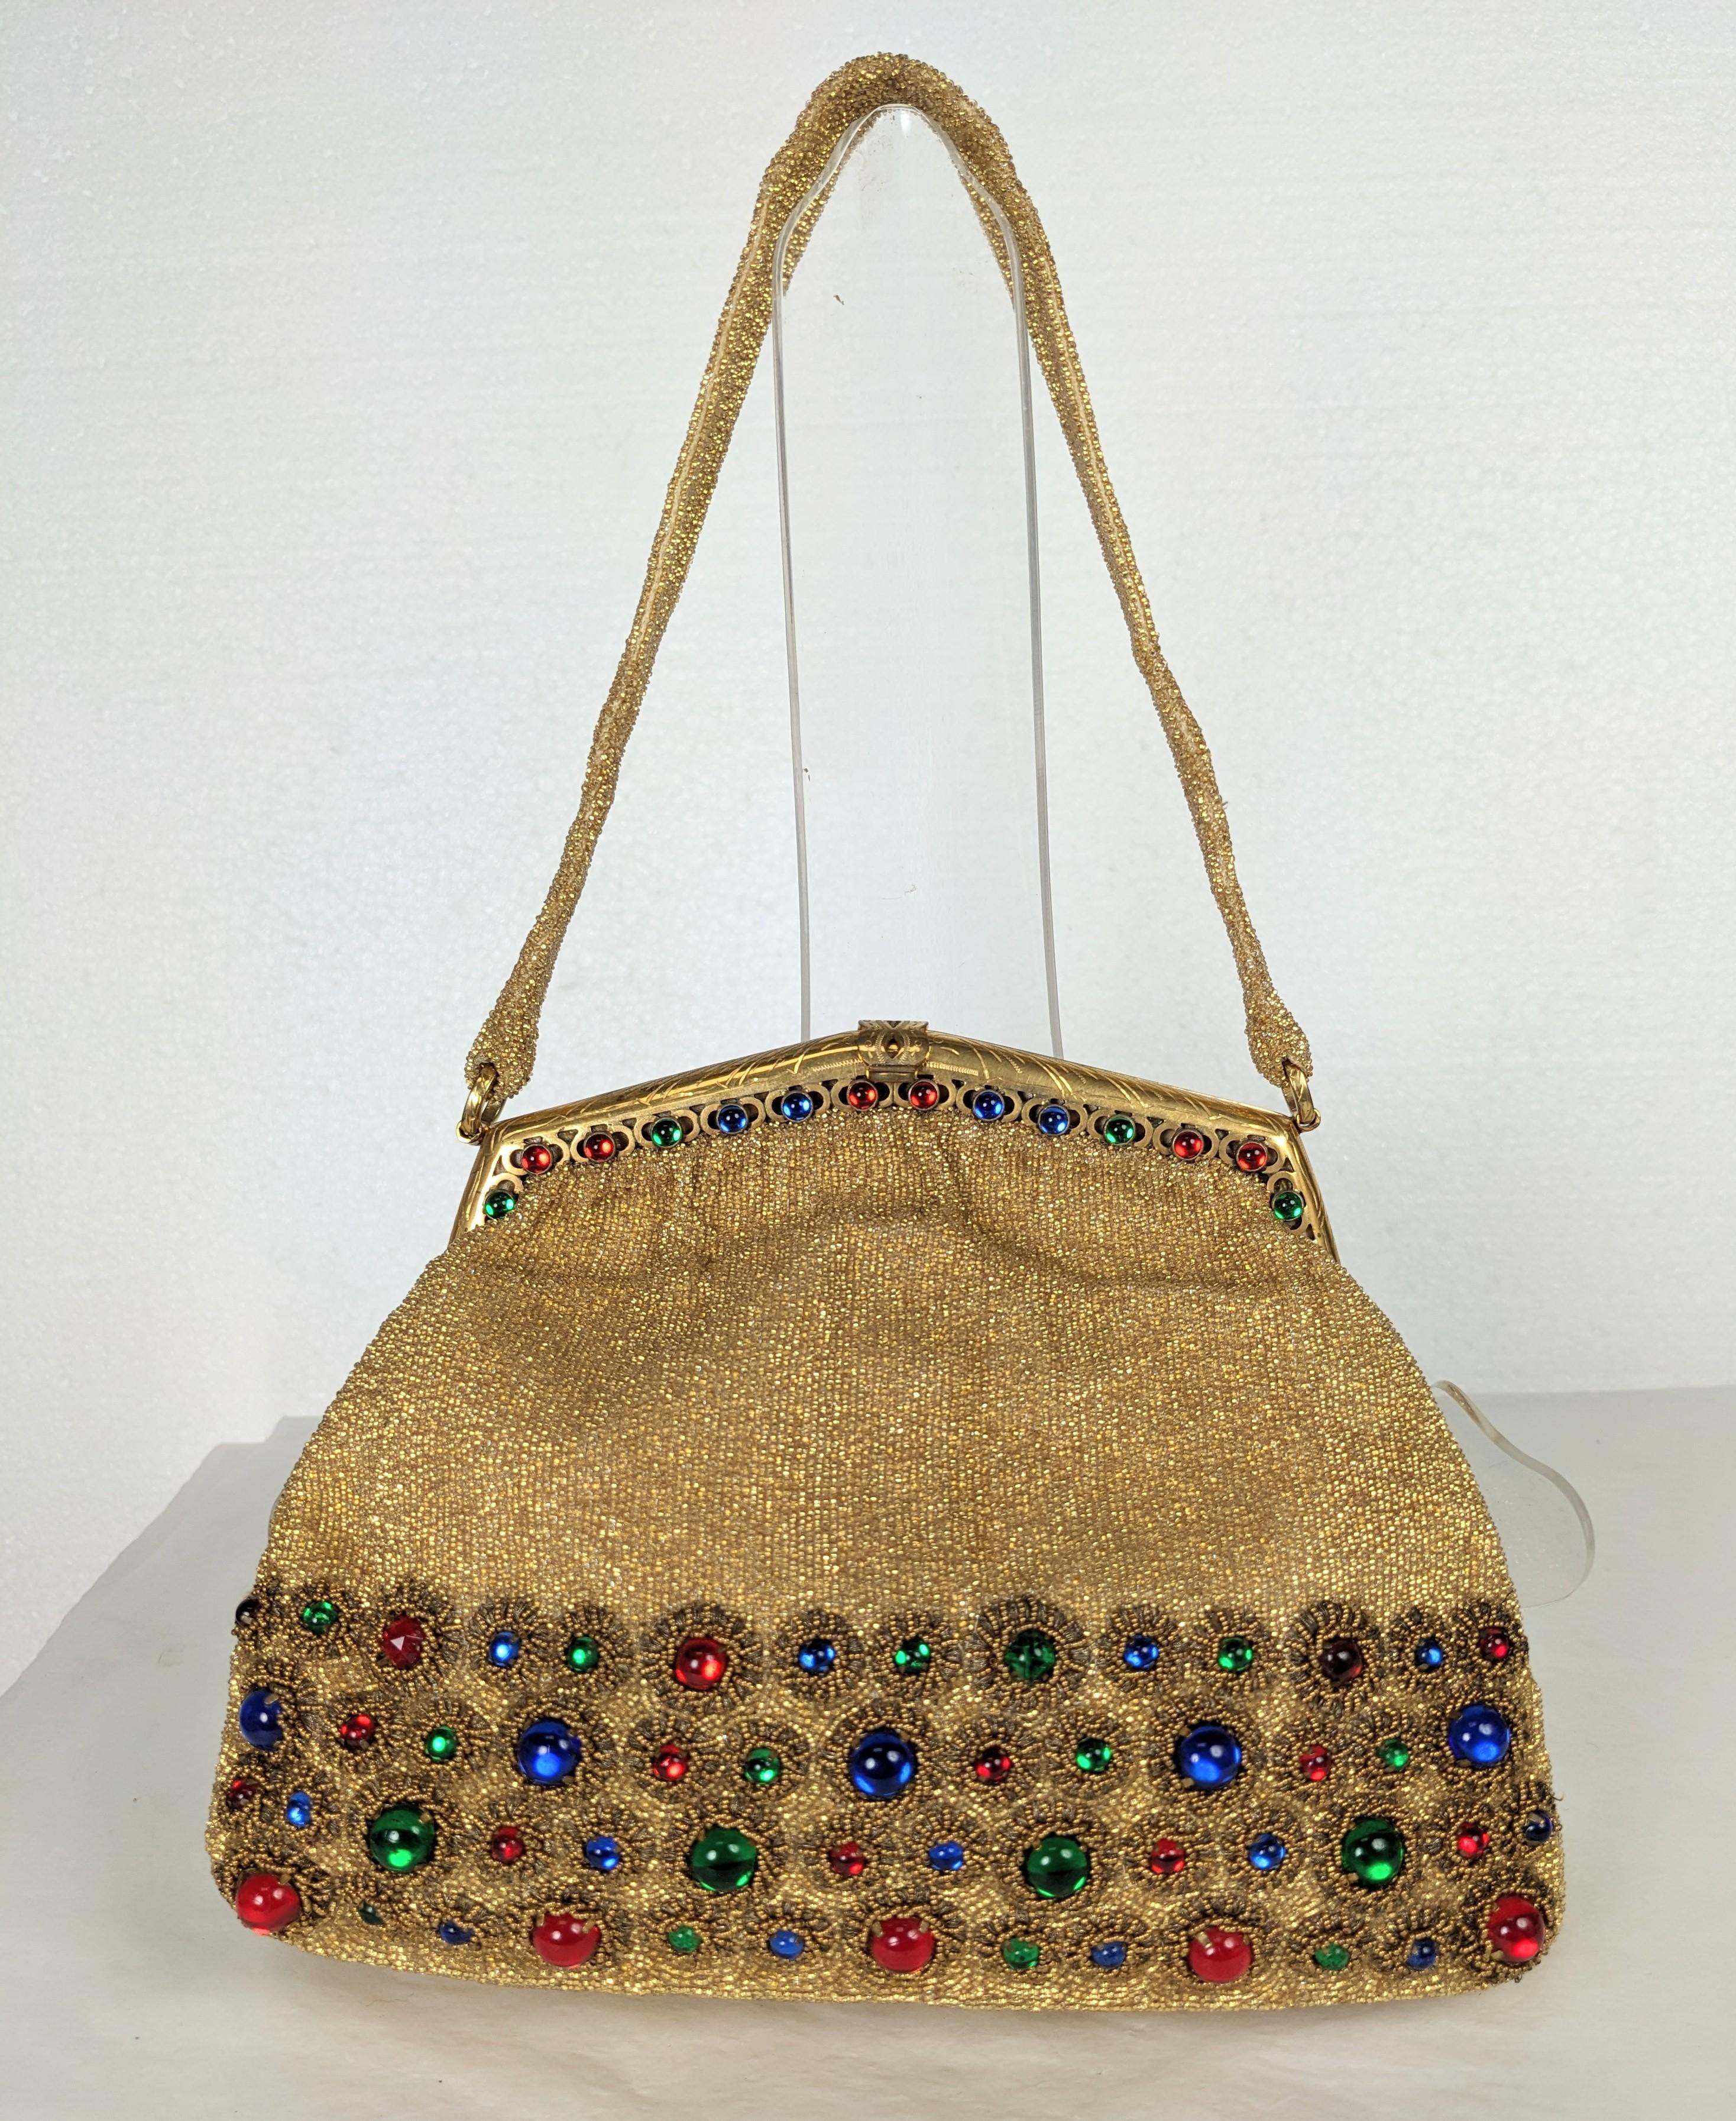 Elaborate Beaded French Evening Bag of gold seed beads with tri color cabochon and gilt bullion embroidery. Incredibly intensive Haute Couture quality hand embroidery with silk satin lining. Matching jeweled frame. 1950's France, retailed by Saks